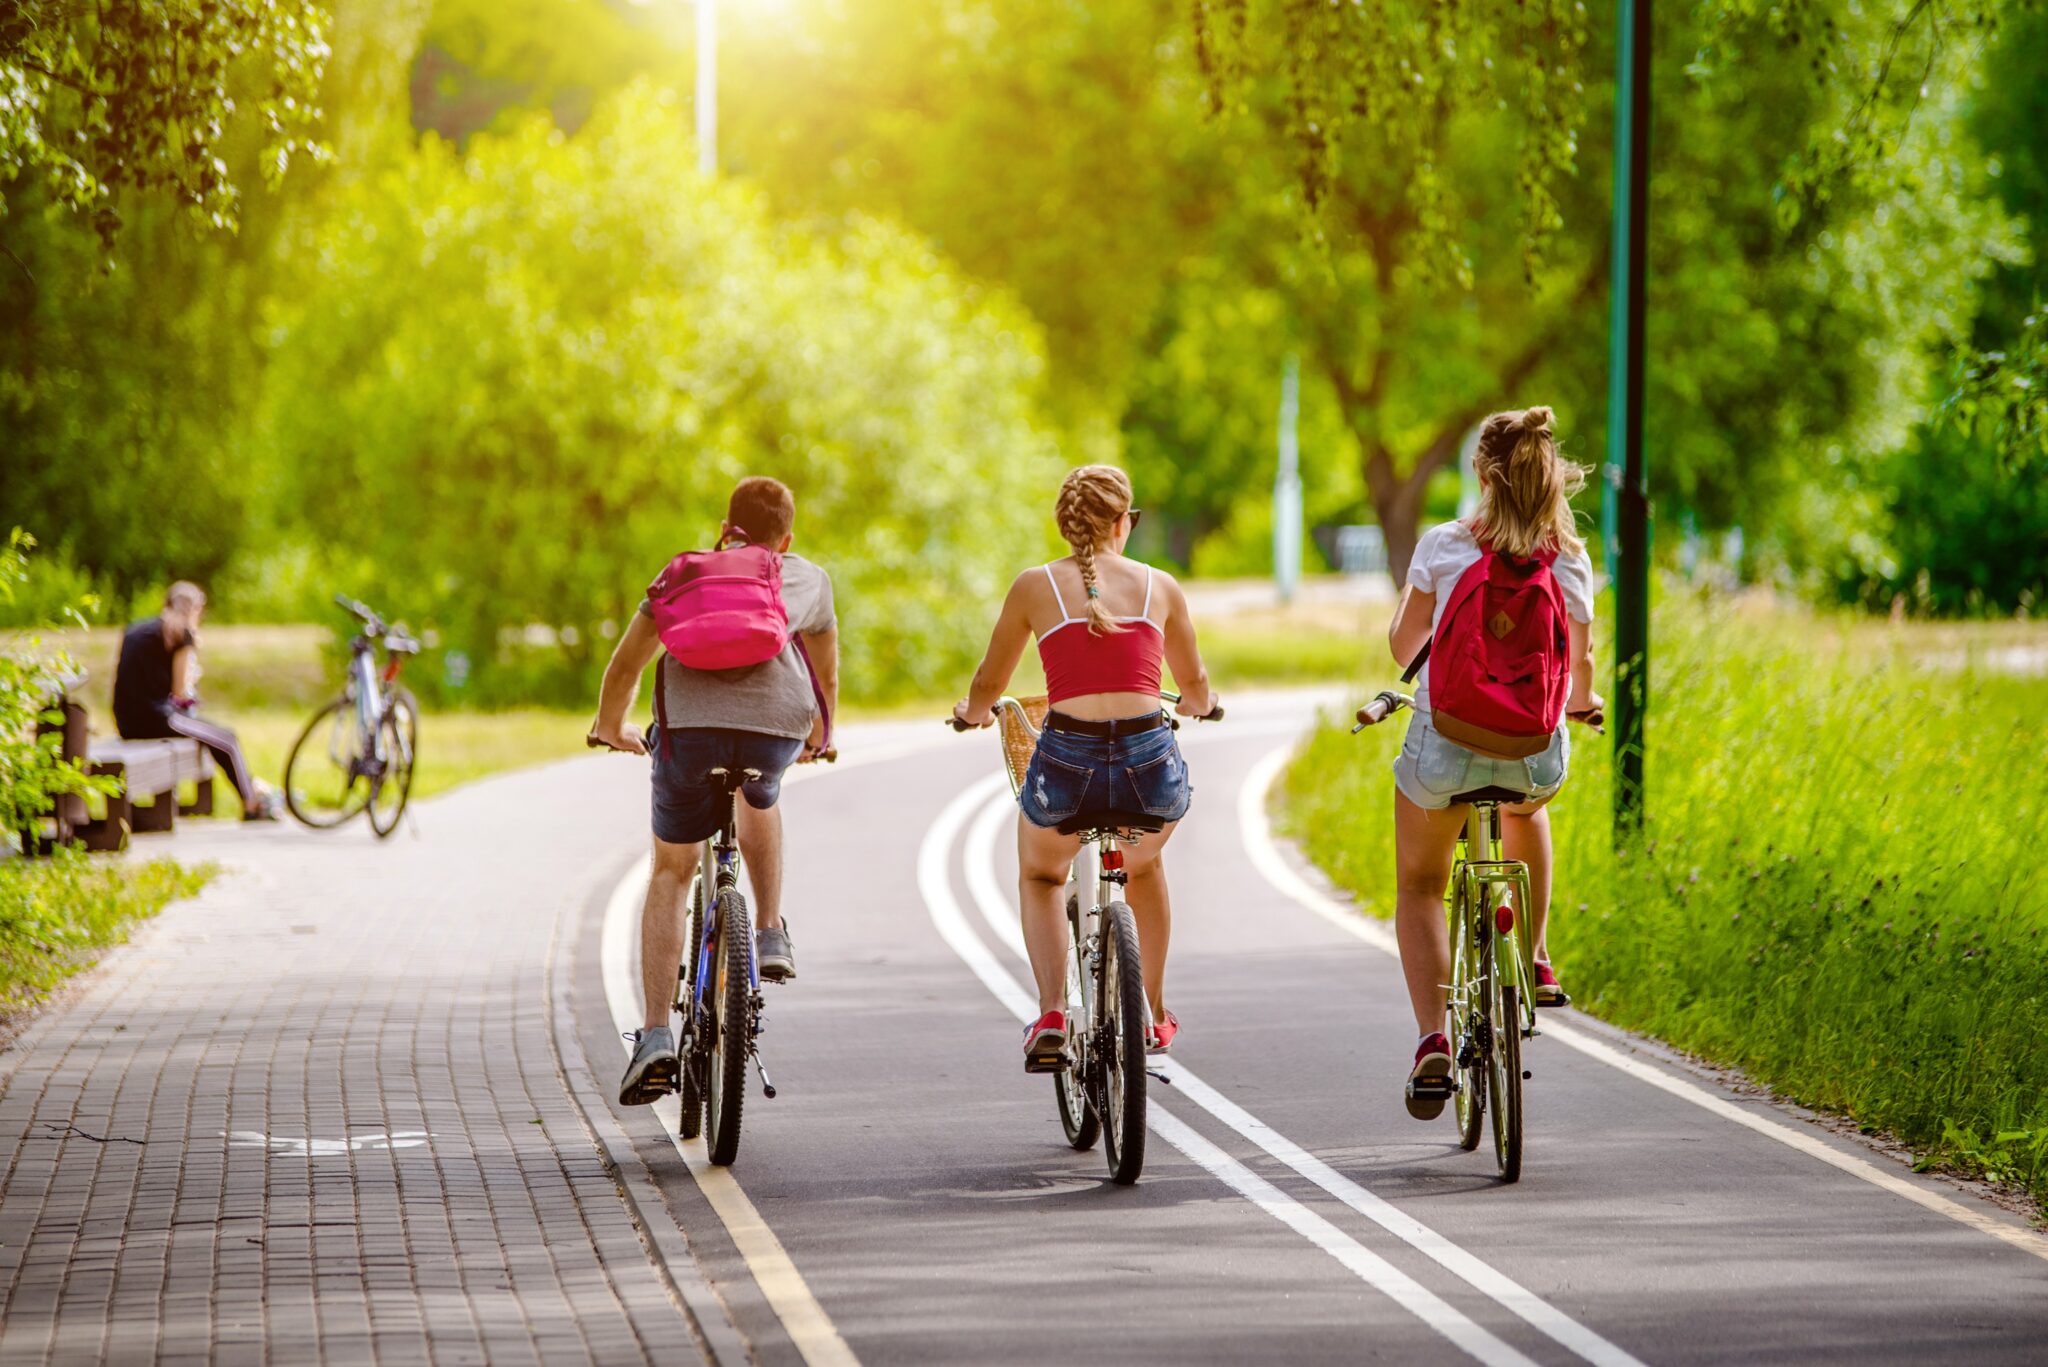 Cycle path: 5 essential criteria to promote the circulation of bicycles